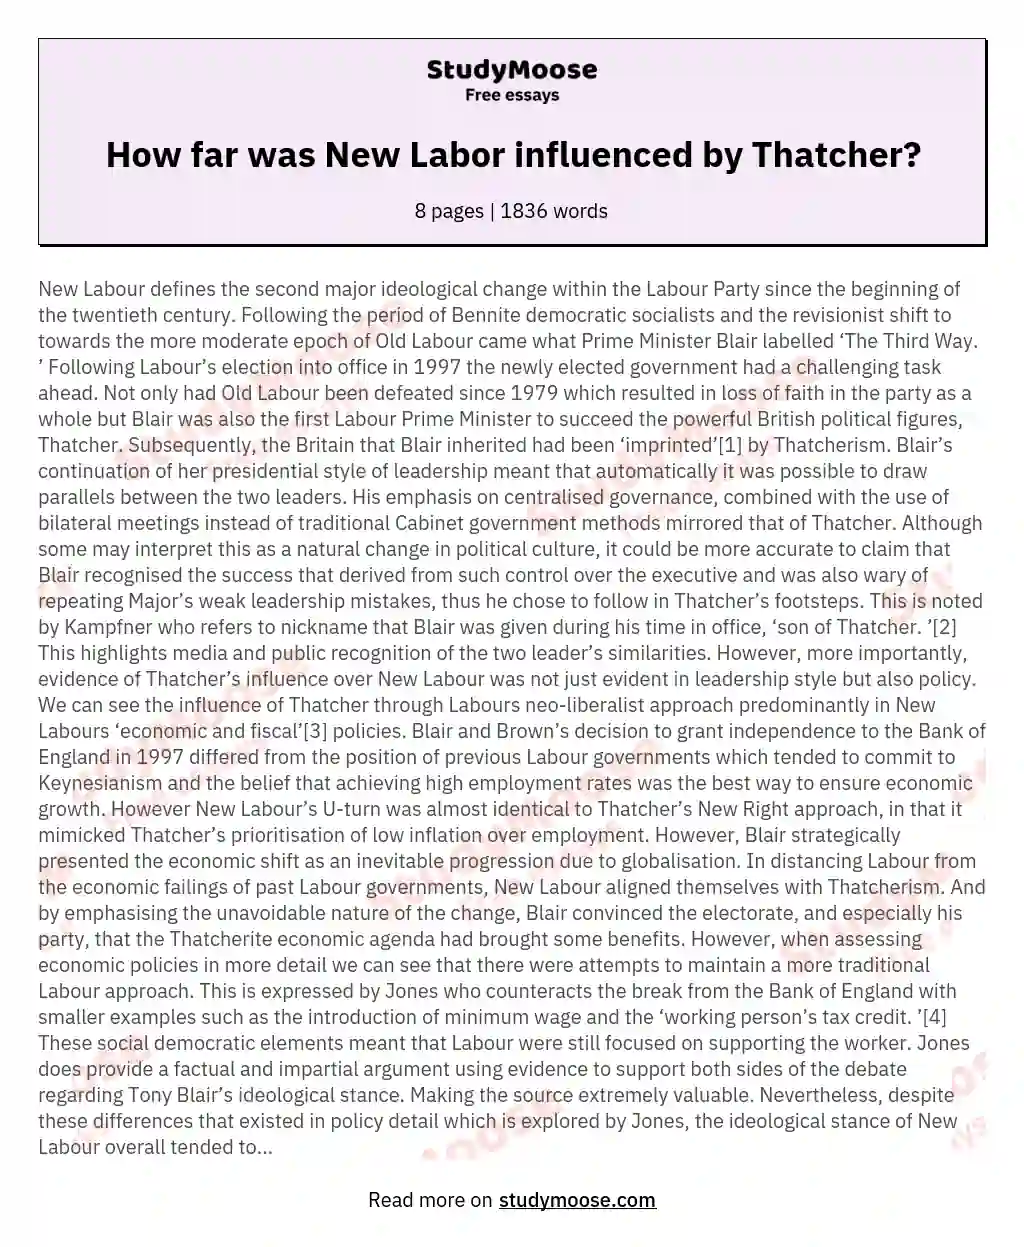 How far was New Labor influenced by Thatcher?